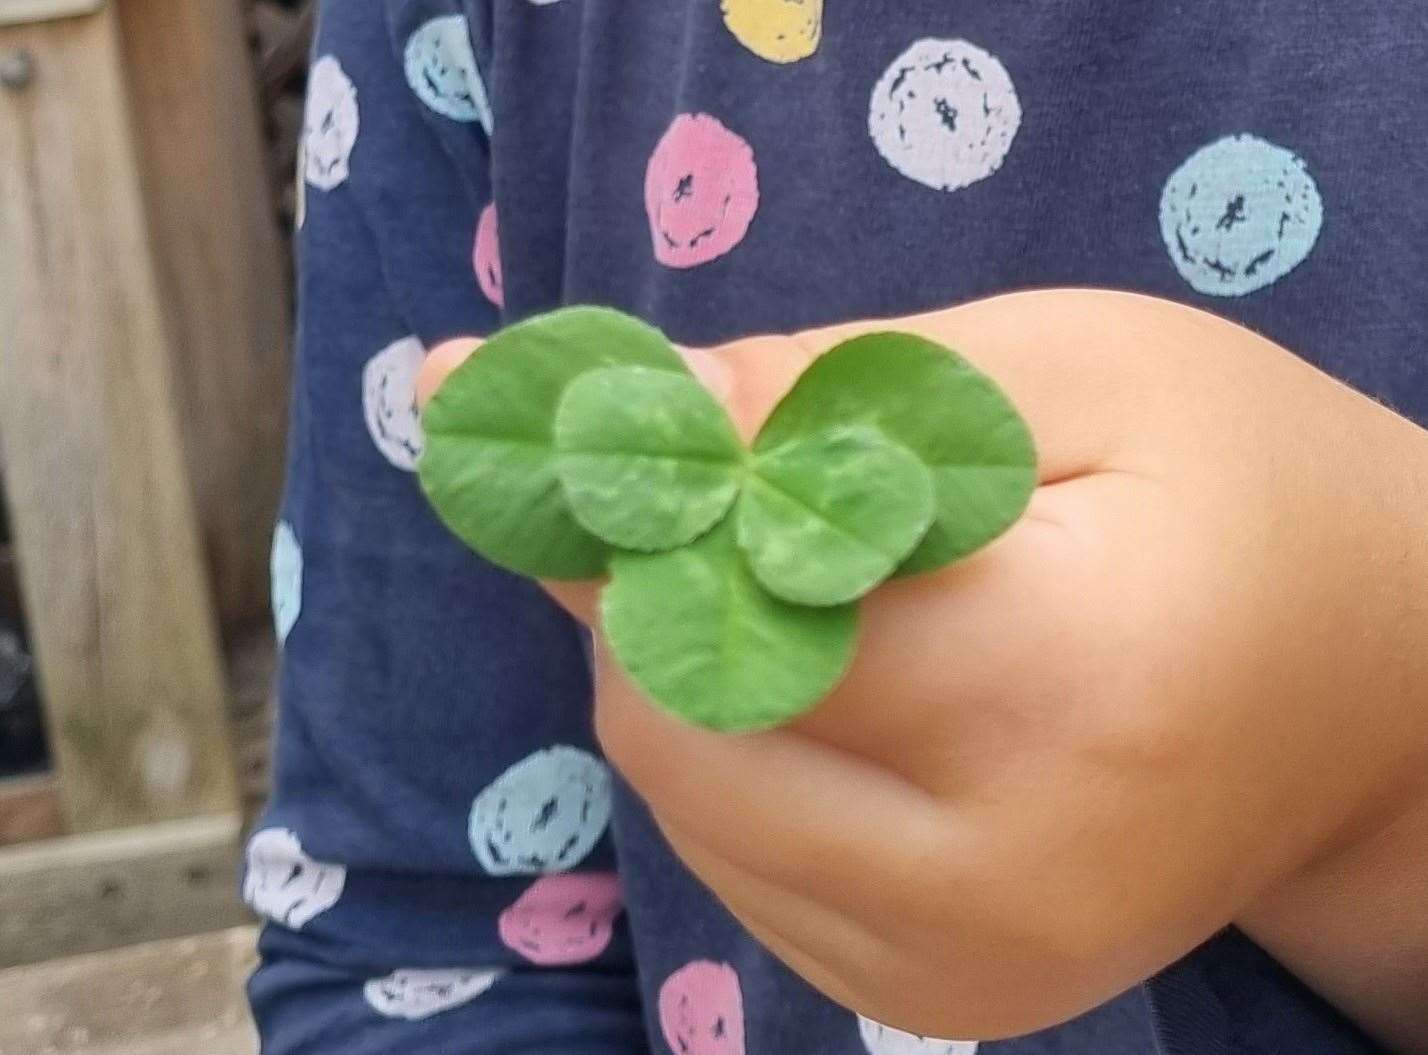 The five-leaf clover found by Rose in Tonbridge